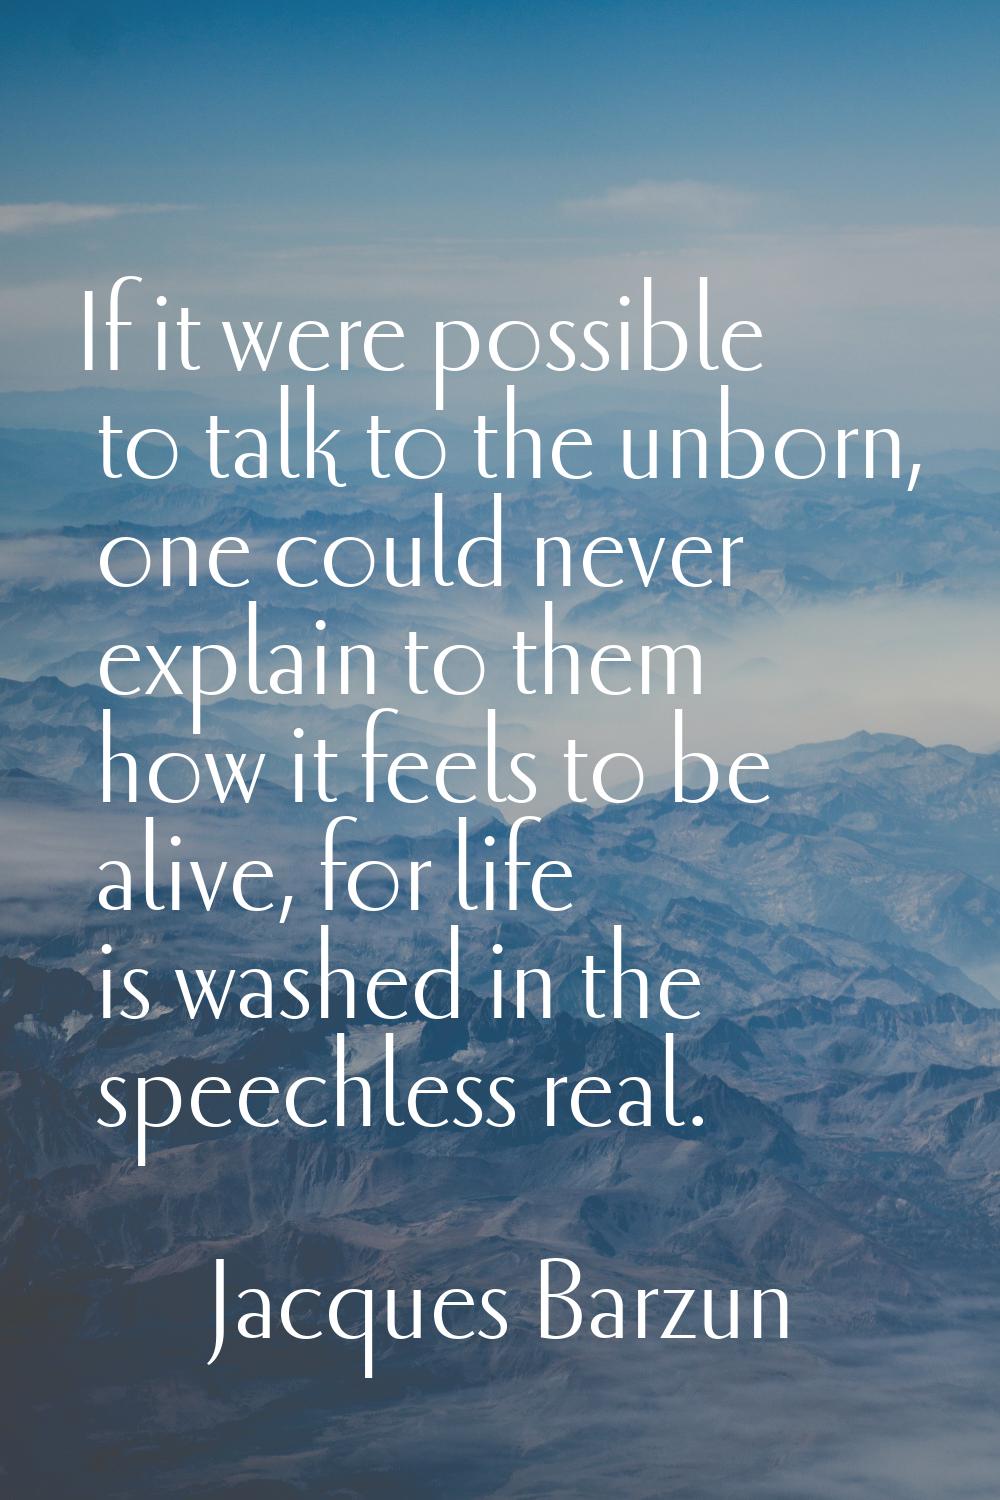 If it were possible to talk to the unborn, one could never explain to them how it feels to be alive